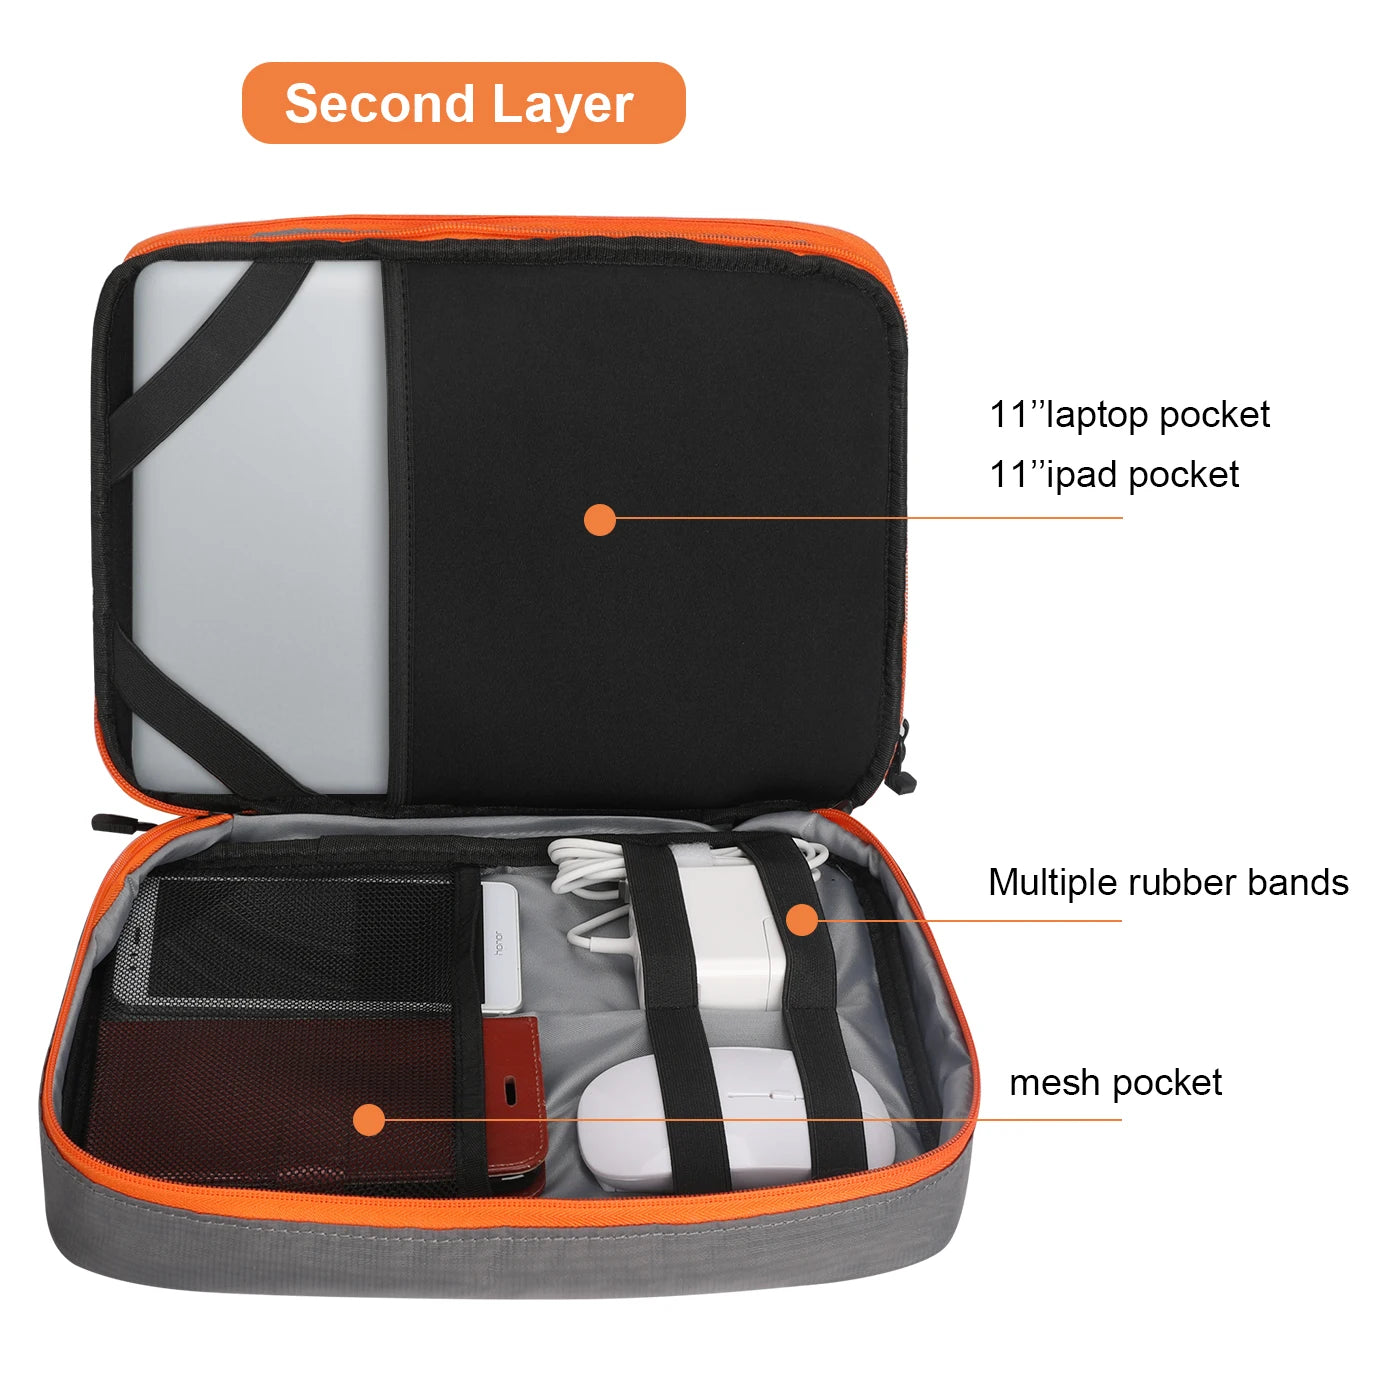 Portable Electronic Accessories Travel case,Cable Organizer Bag Gadget Carry Bag for iPad,Cables,Power,USB Flash Drive, Charger